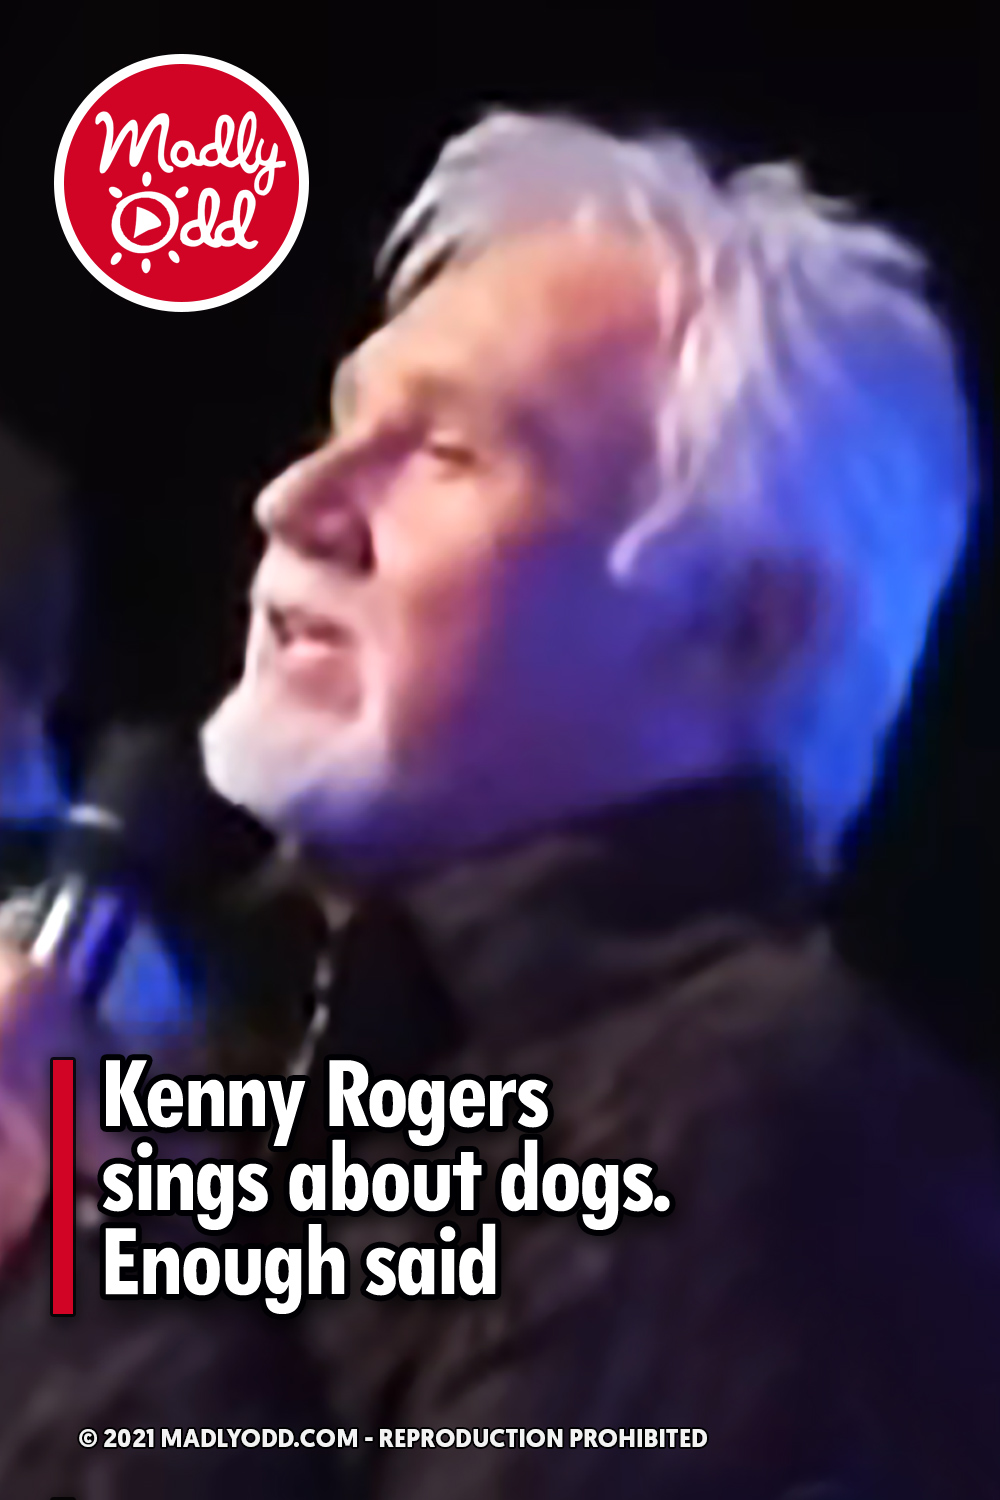 Kenny Rogers sings about dogs. Enough said